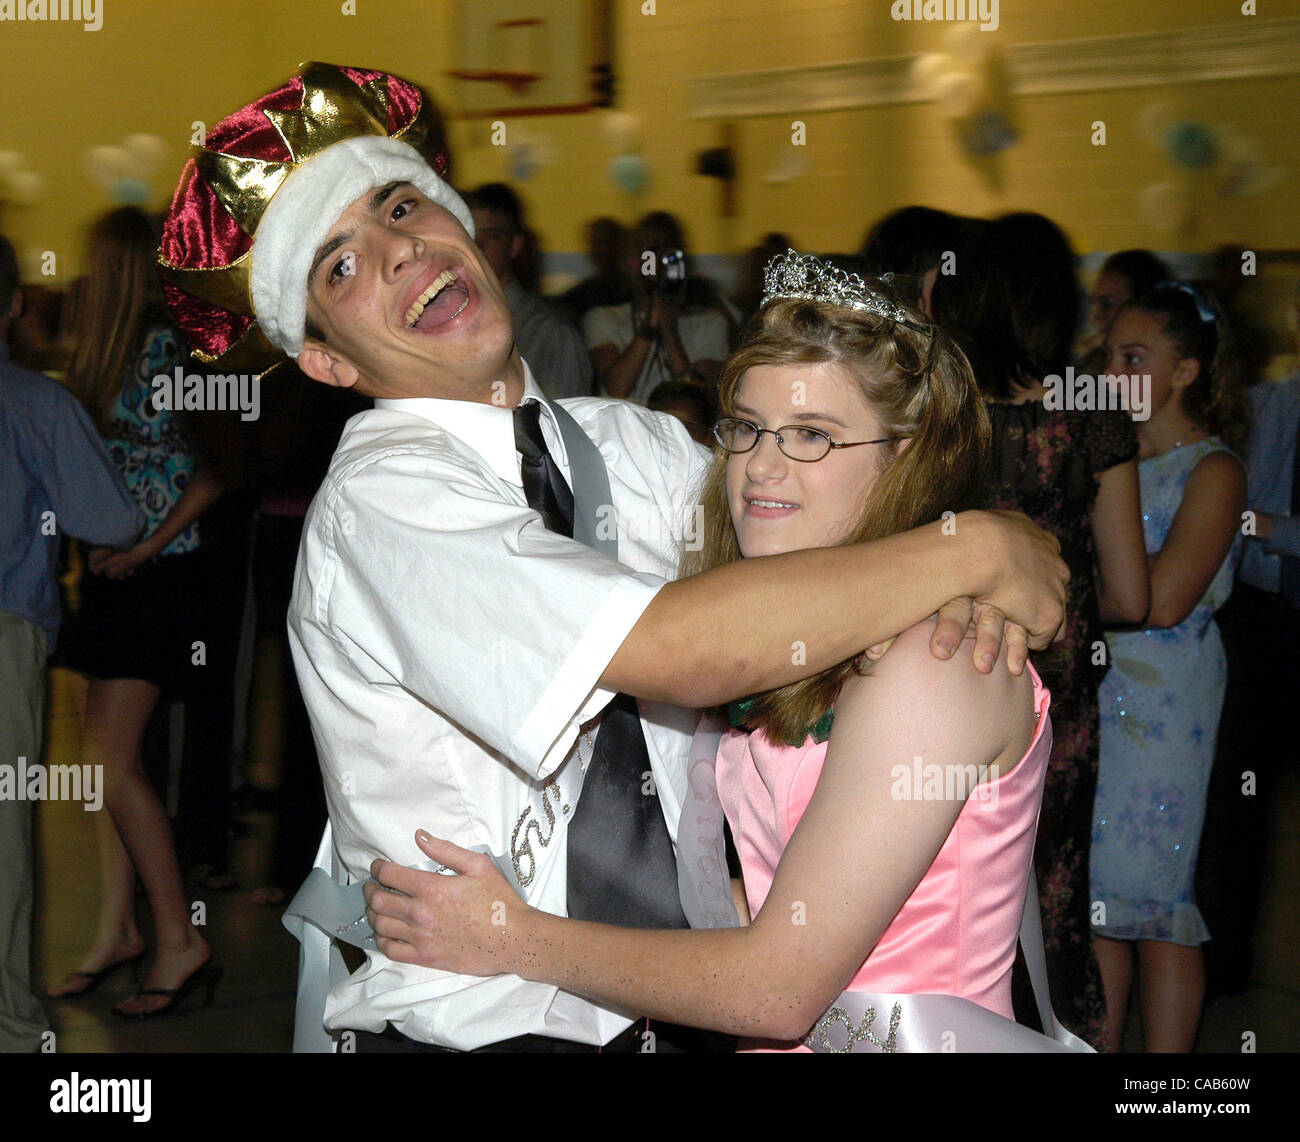 May 05, 2004; Woodstock, GA, USA; Mentally disabled students dance at the Special Needs Prom in Woodstock, GA. Prom King and Queen share a dance together. DANIEL MONCRIEF, 19, and CARA HAYNES, 18, at the Community-wide prom only for disabled and special needs students. Stock Photo